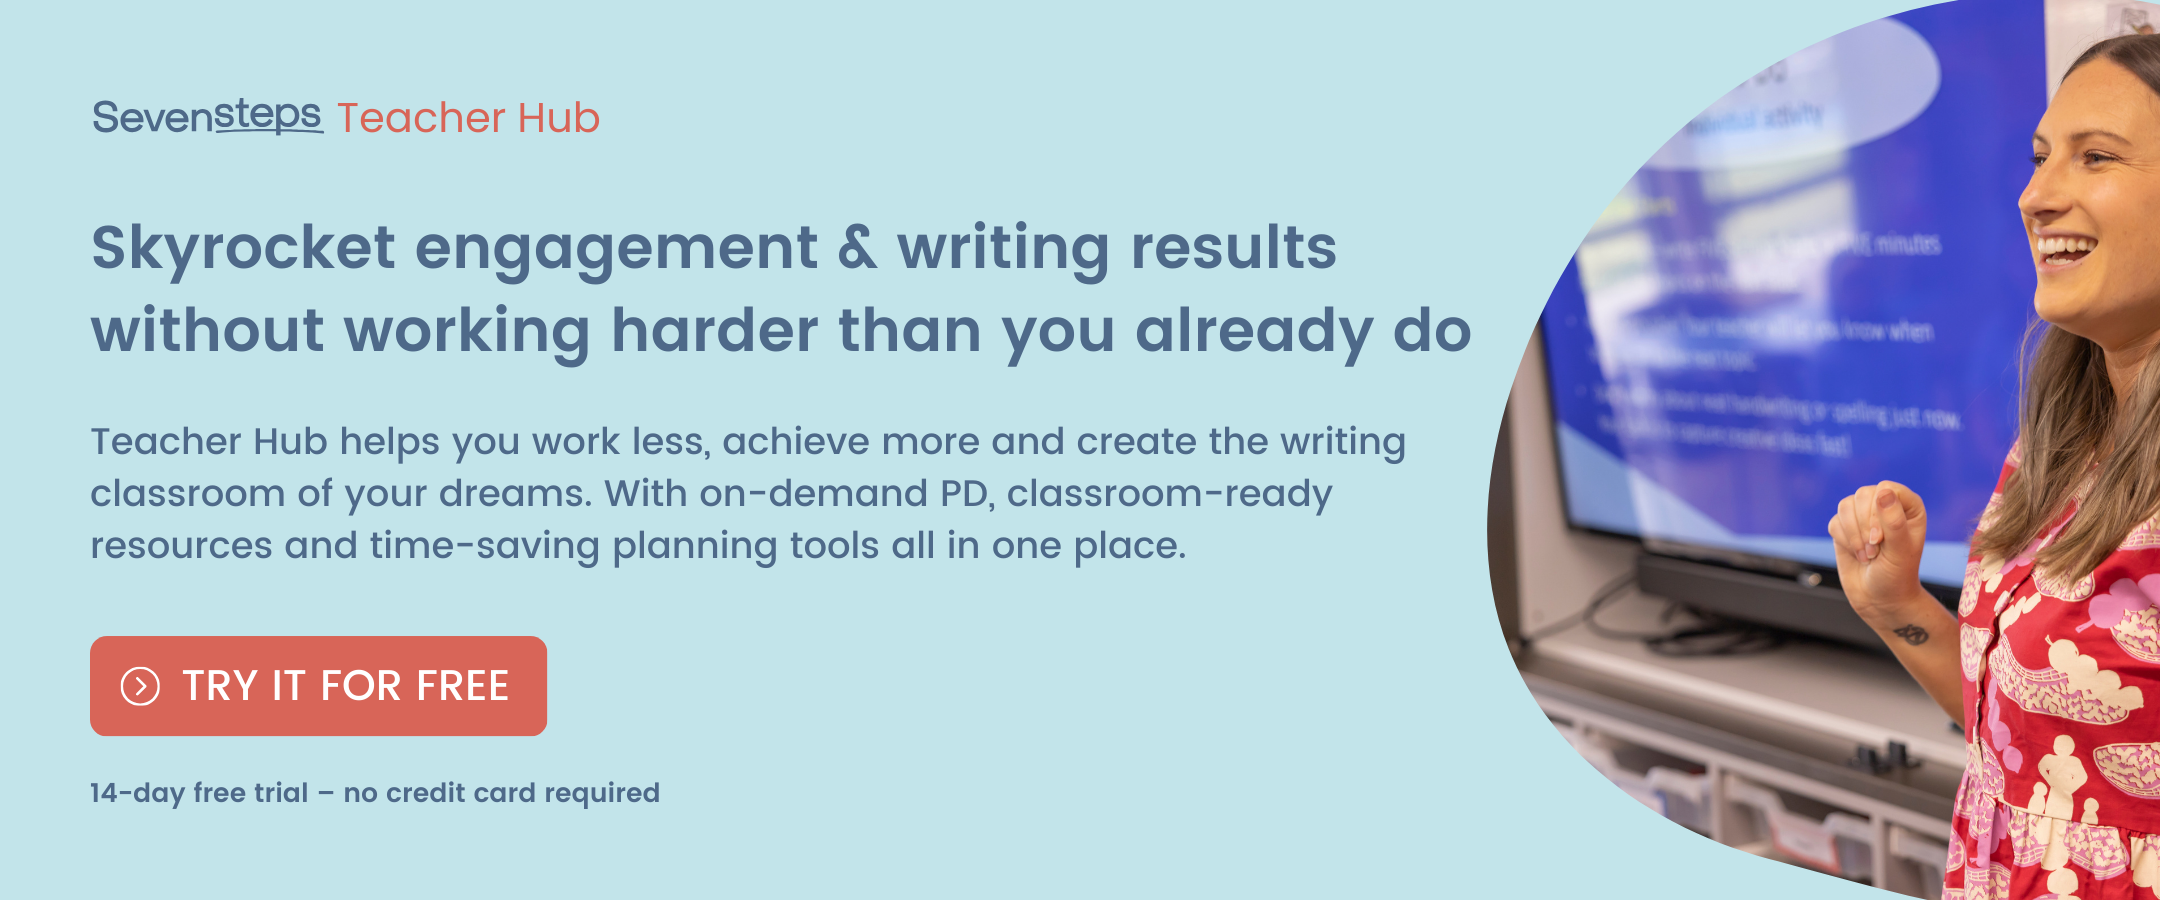 Skyrocket your students’ engagement and writing skills without working harder than you already do. Seven Steps Teacher Hub will help you work less, achieve more and create the writing classroom of your dreams. With on-demand PD, classroom-ready resources and time-saving planning and assessment tools all in one place.